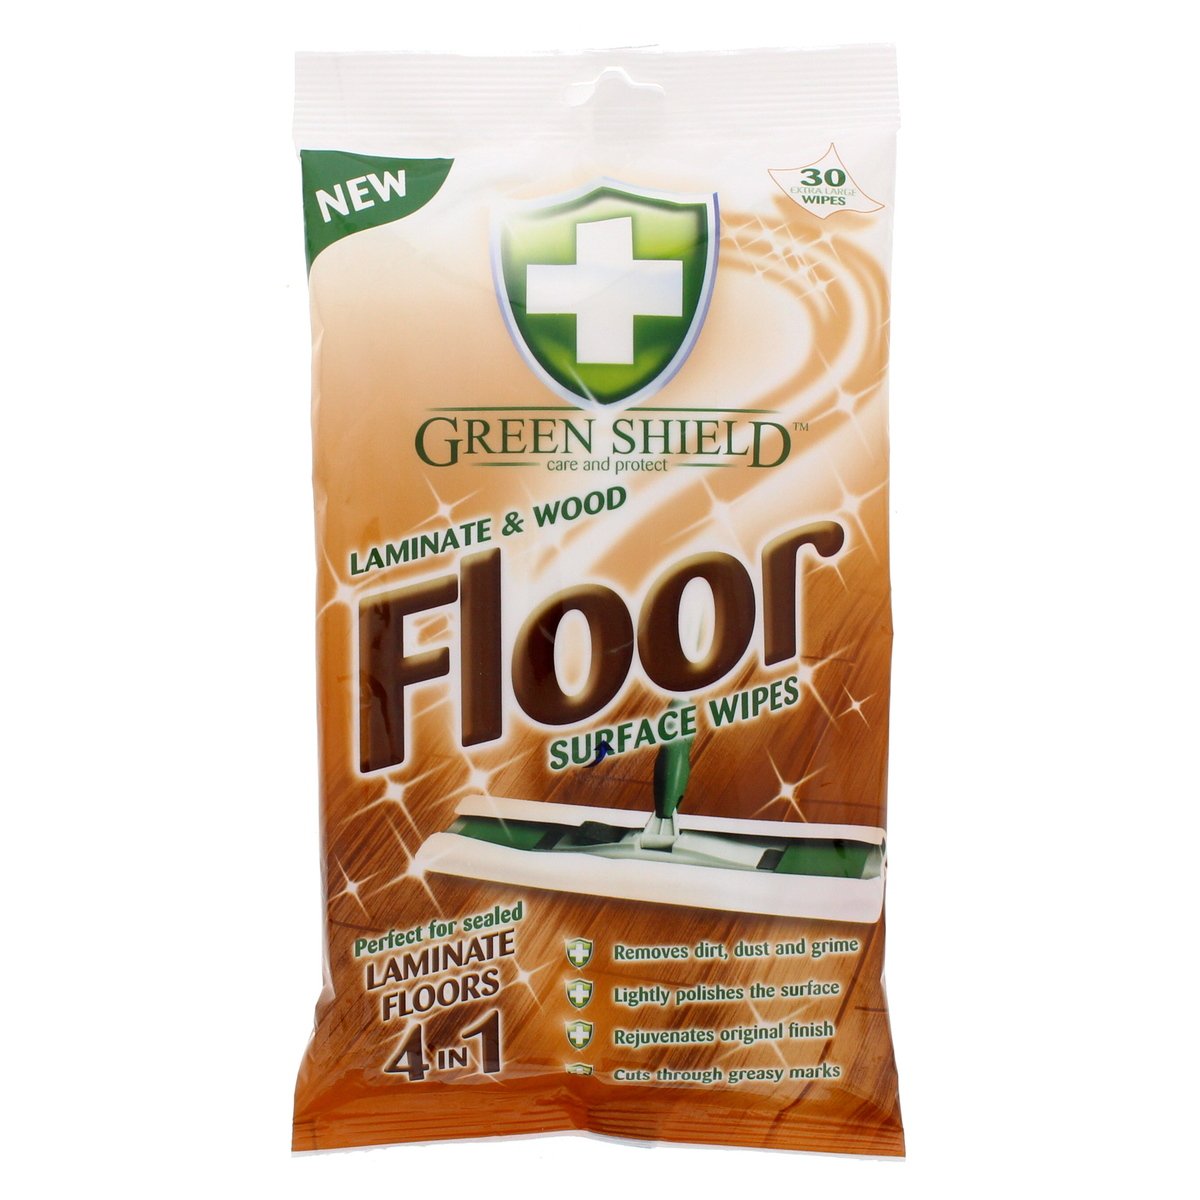 Green Shield Laminate And Wood Floor Surface Wipes 30Pcs